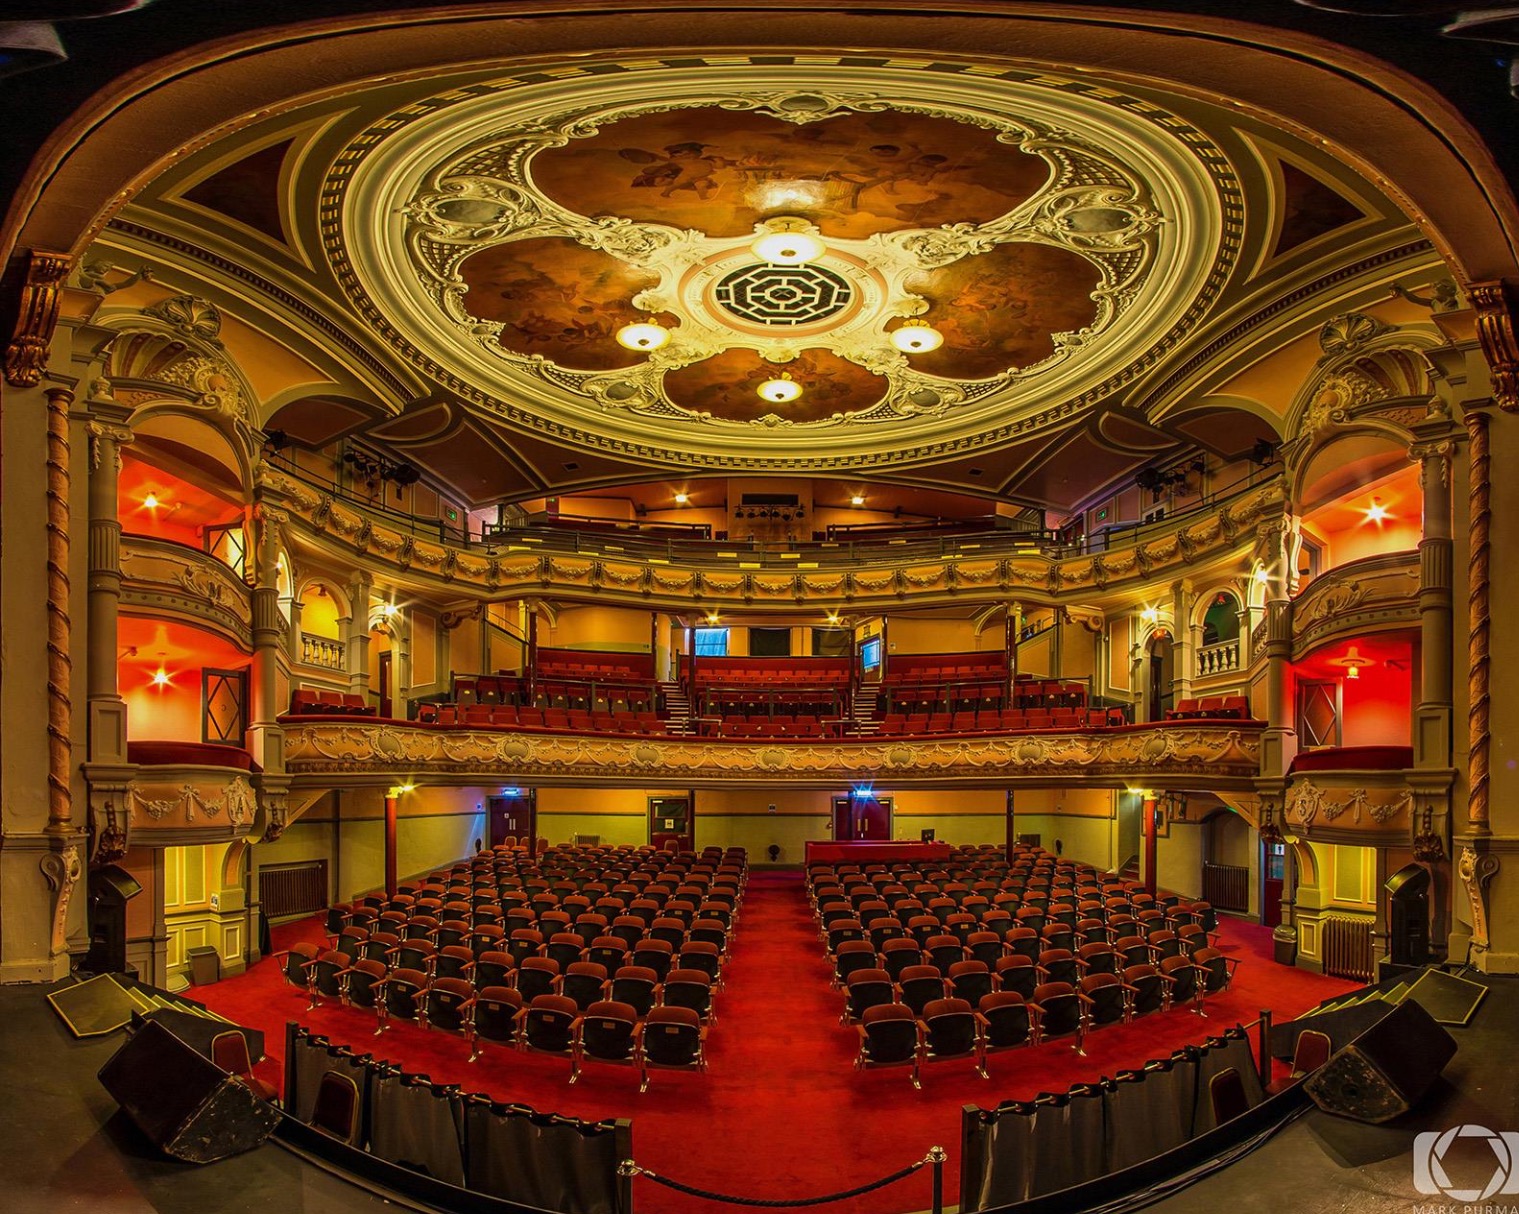 Aberdeen's Tivoli Theatre now has the capability to expand its audience by 50 million people